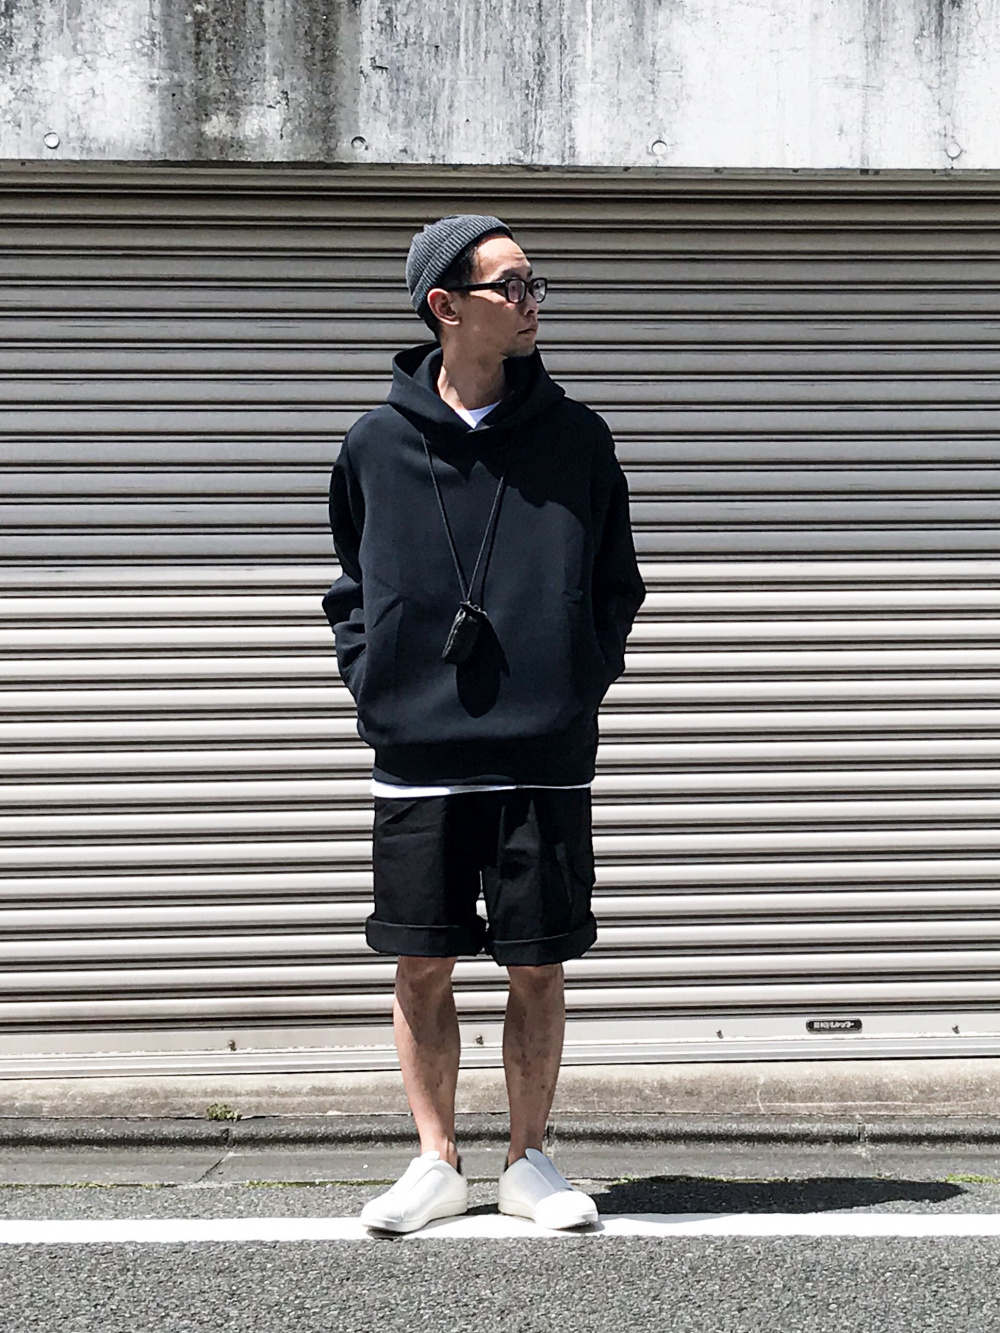 Check styling ideas for「Ultra Stretch Dry Sweat Pullover Hoodie